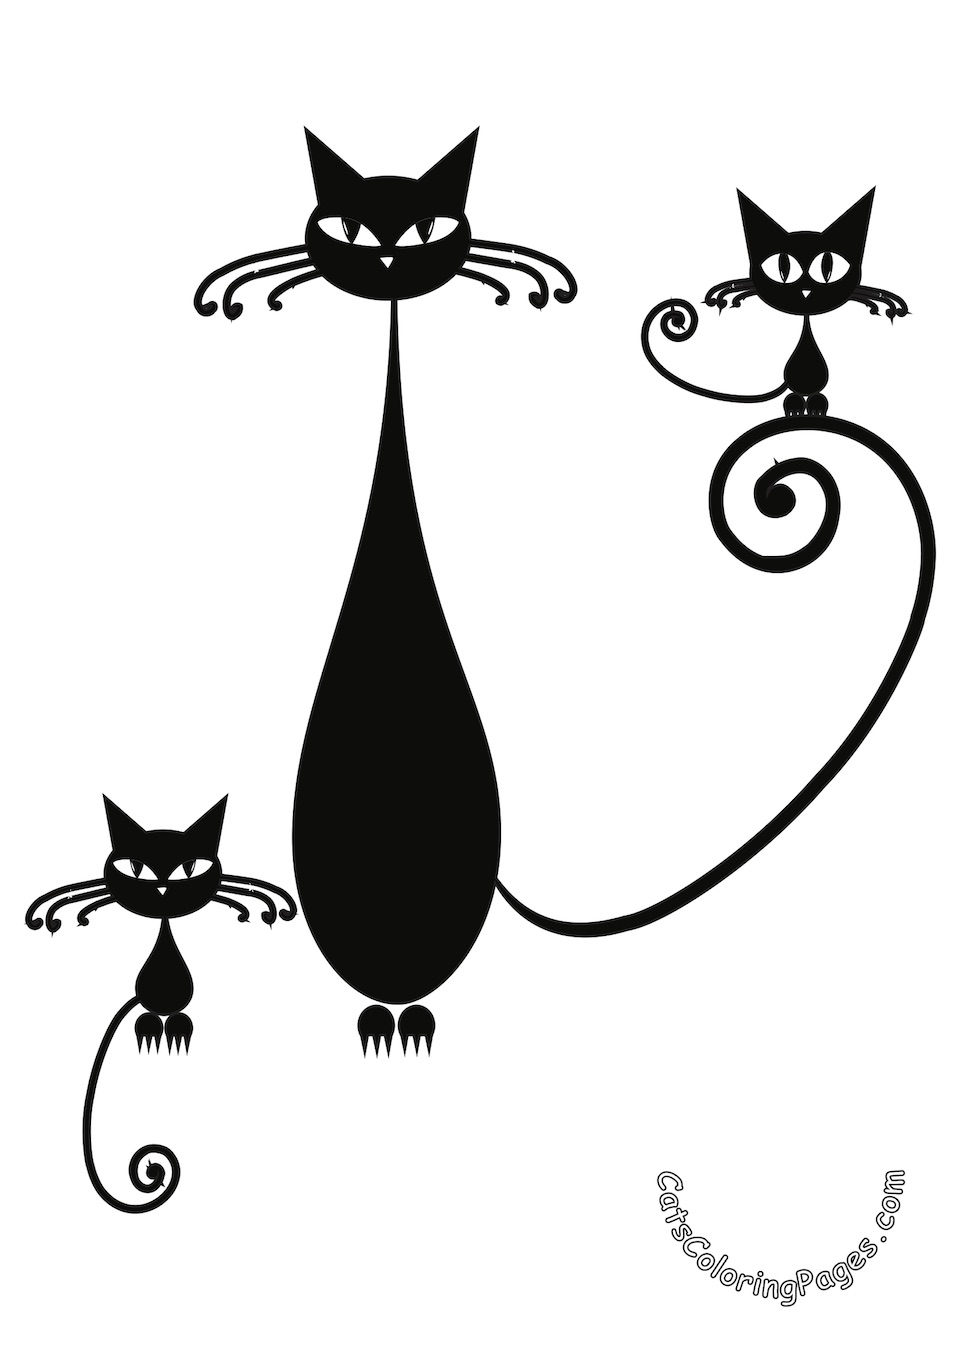 Black Cat with Two Kittens Colored Coloring Page